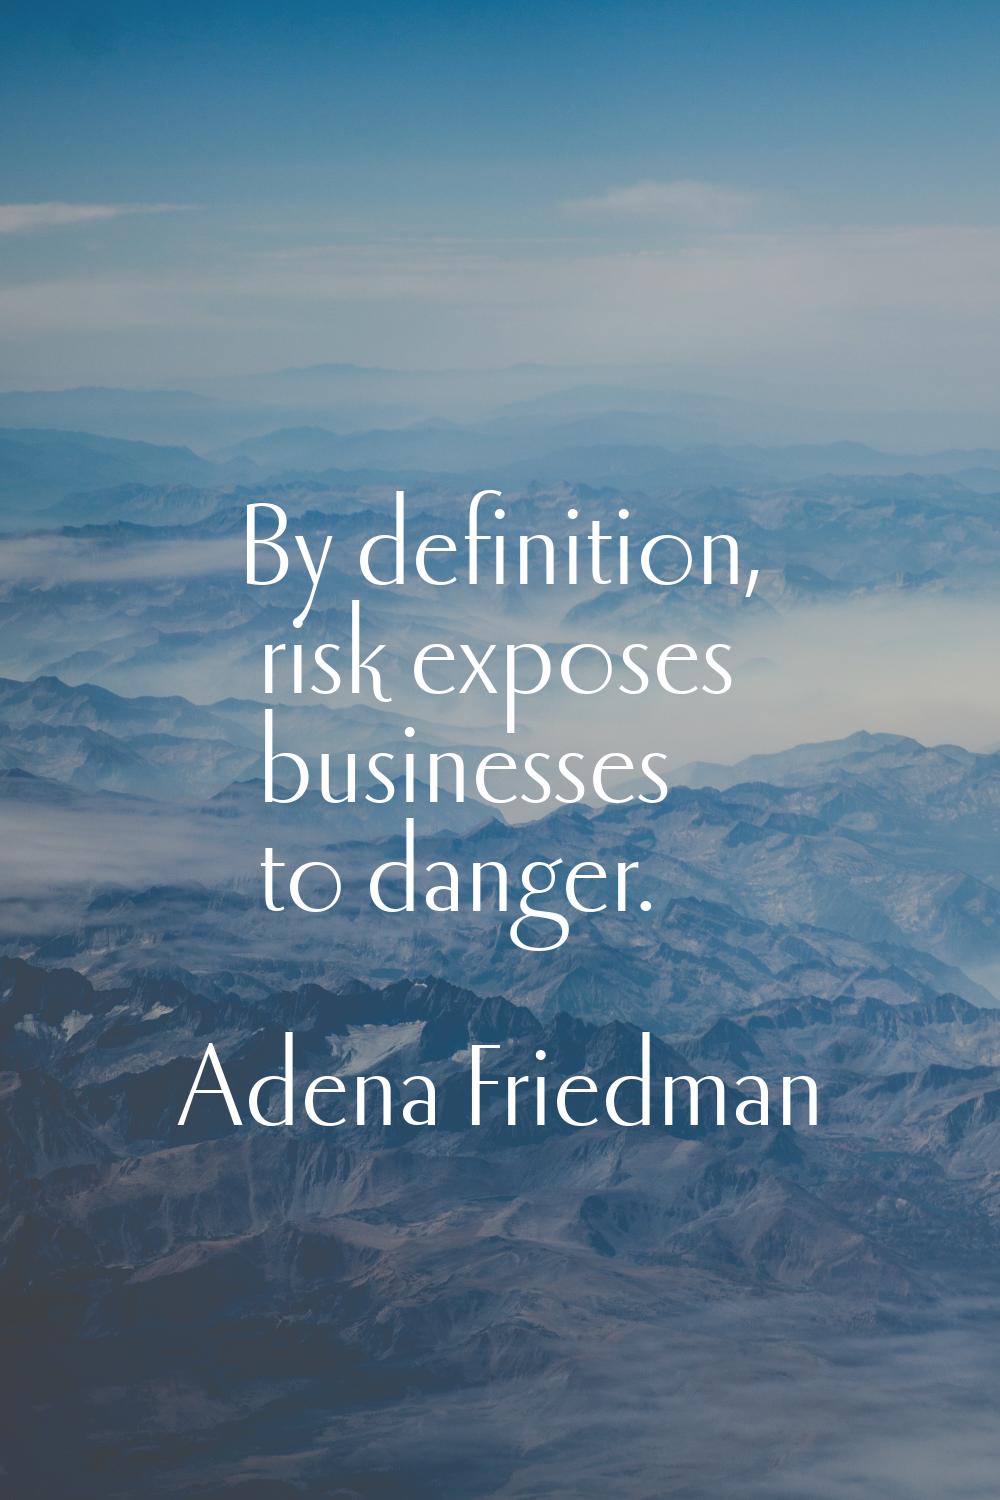 By definition, risk exposes businesses to danger.